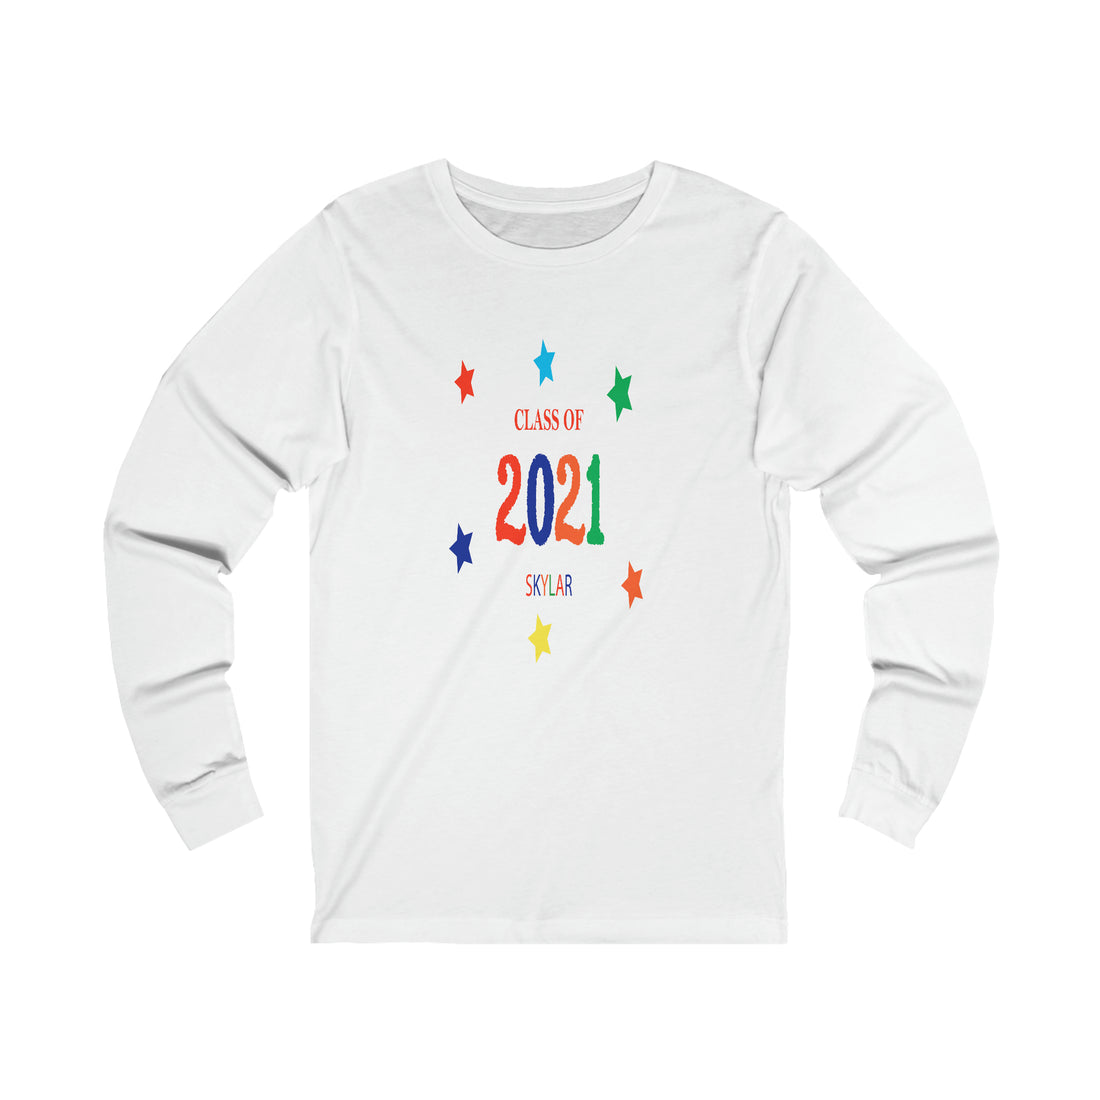 Class of ... with Year &amp; Name Customizable - Unisex Jersey Long Sleeve Tee